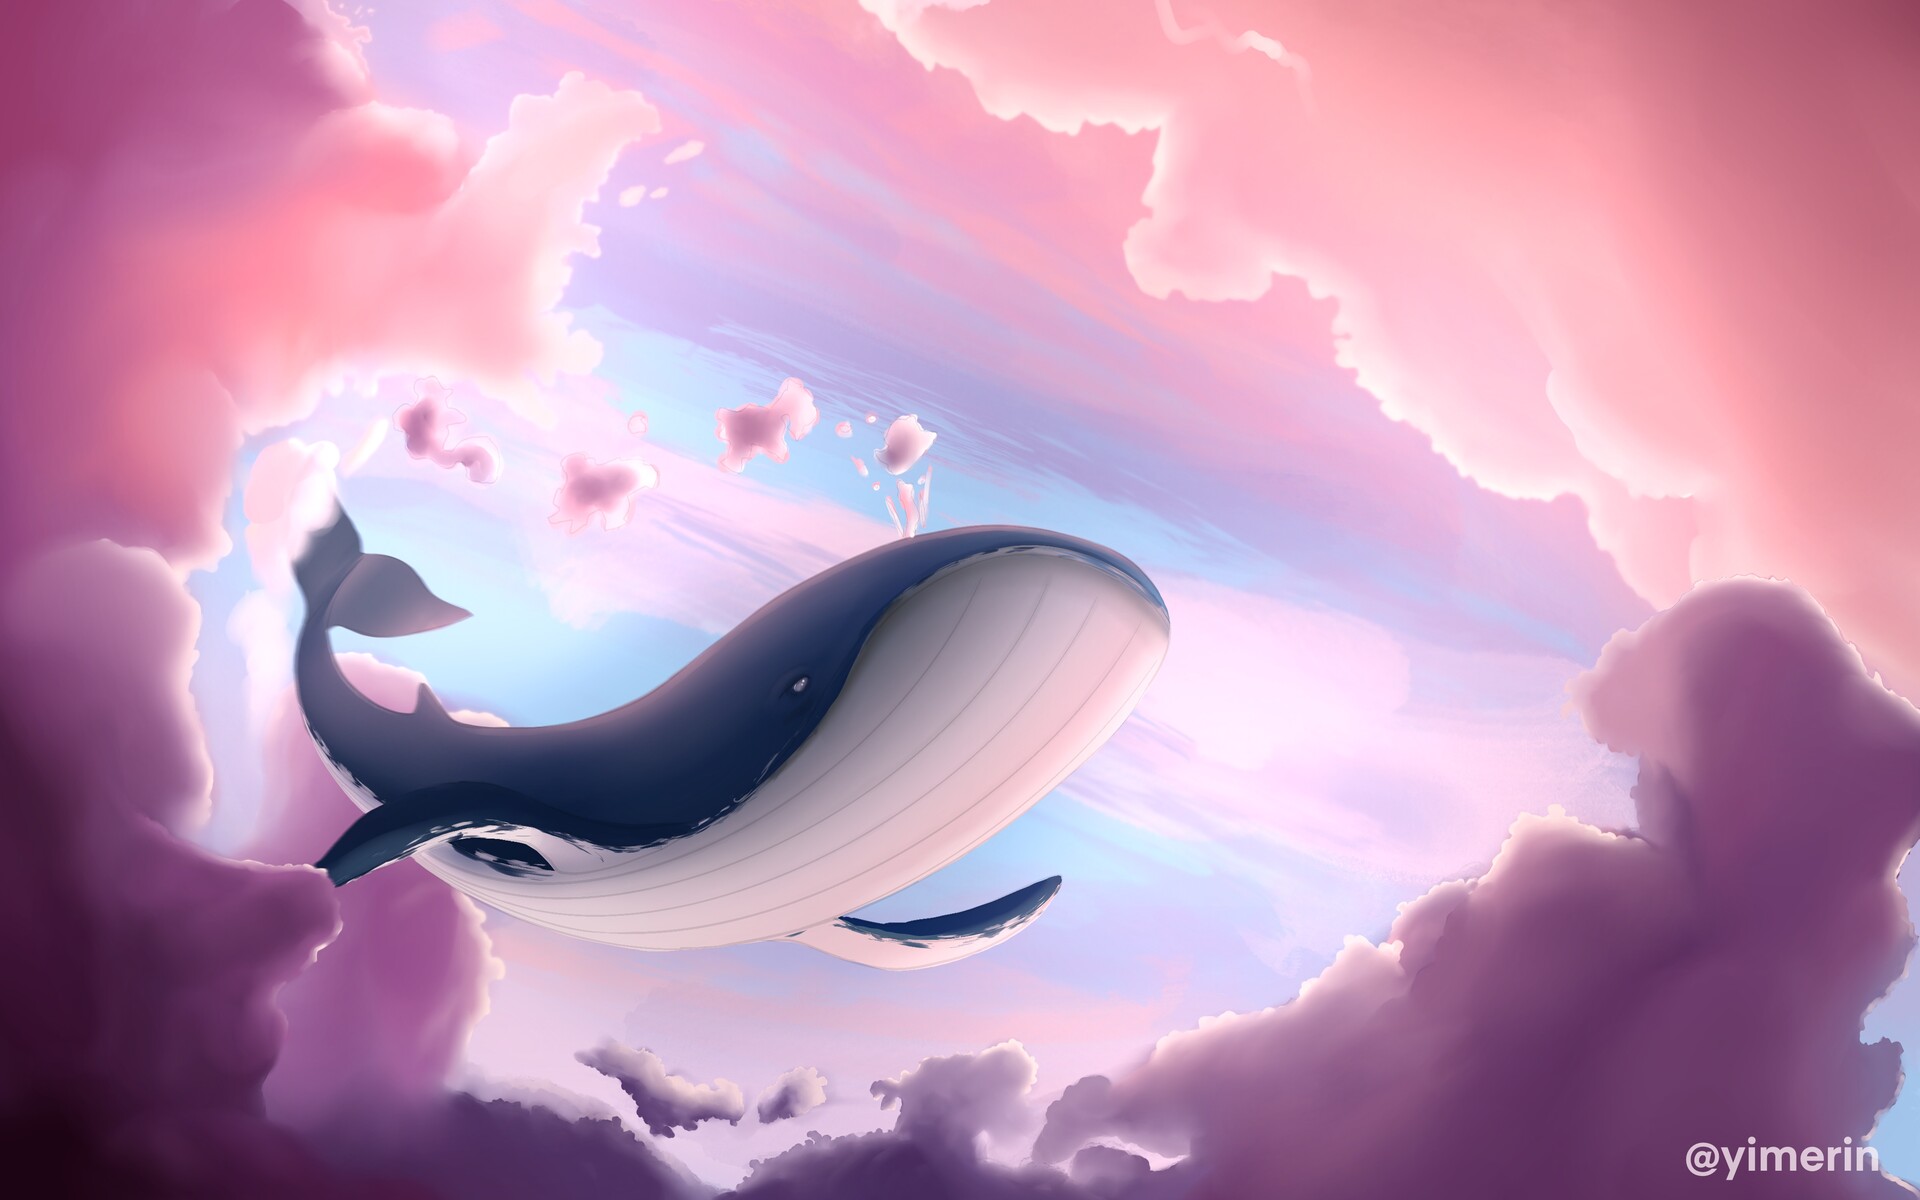 ArtStation - Flying Whale in the Clouds